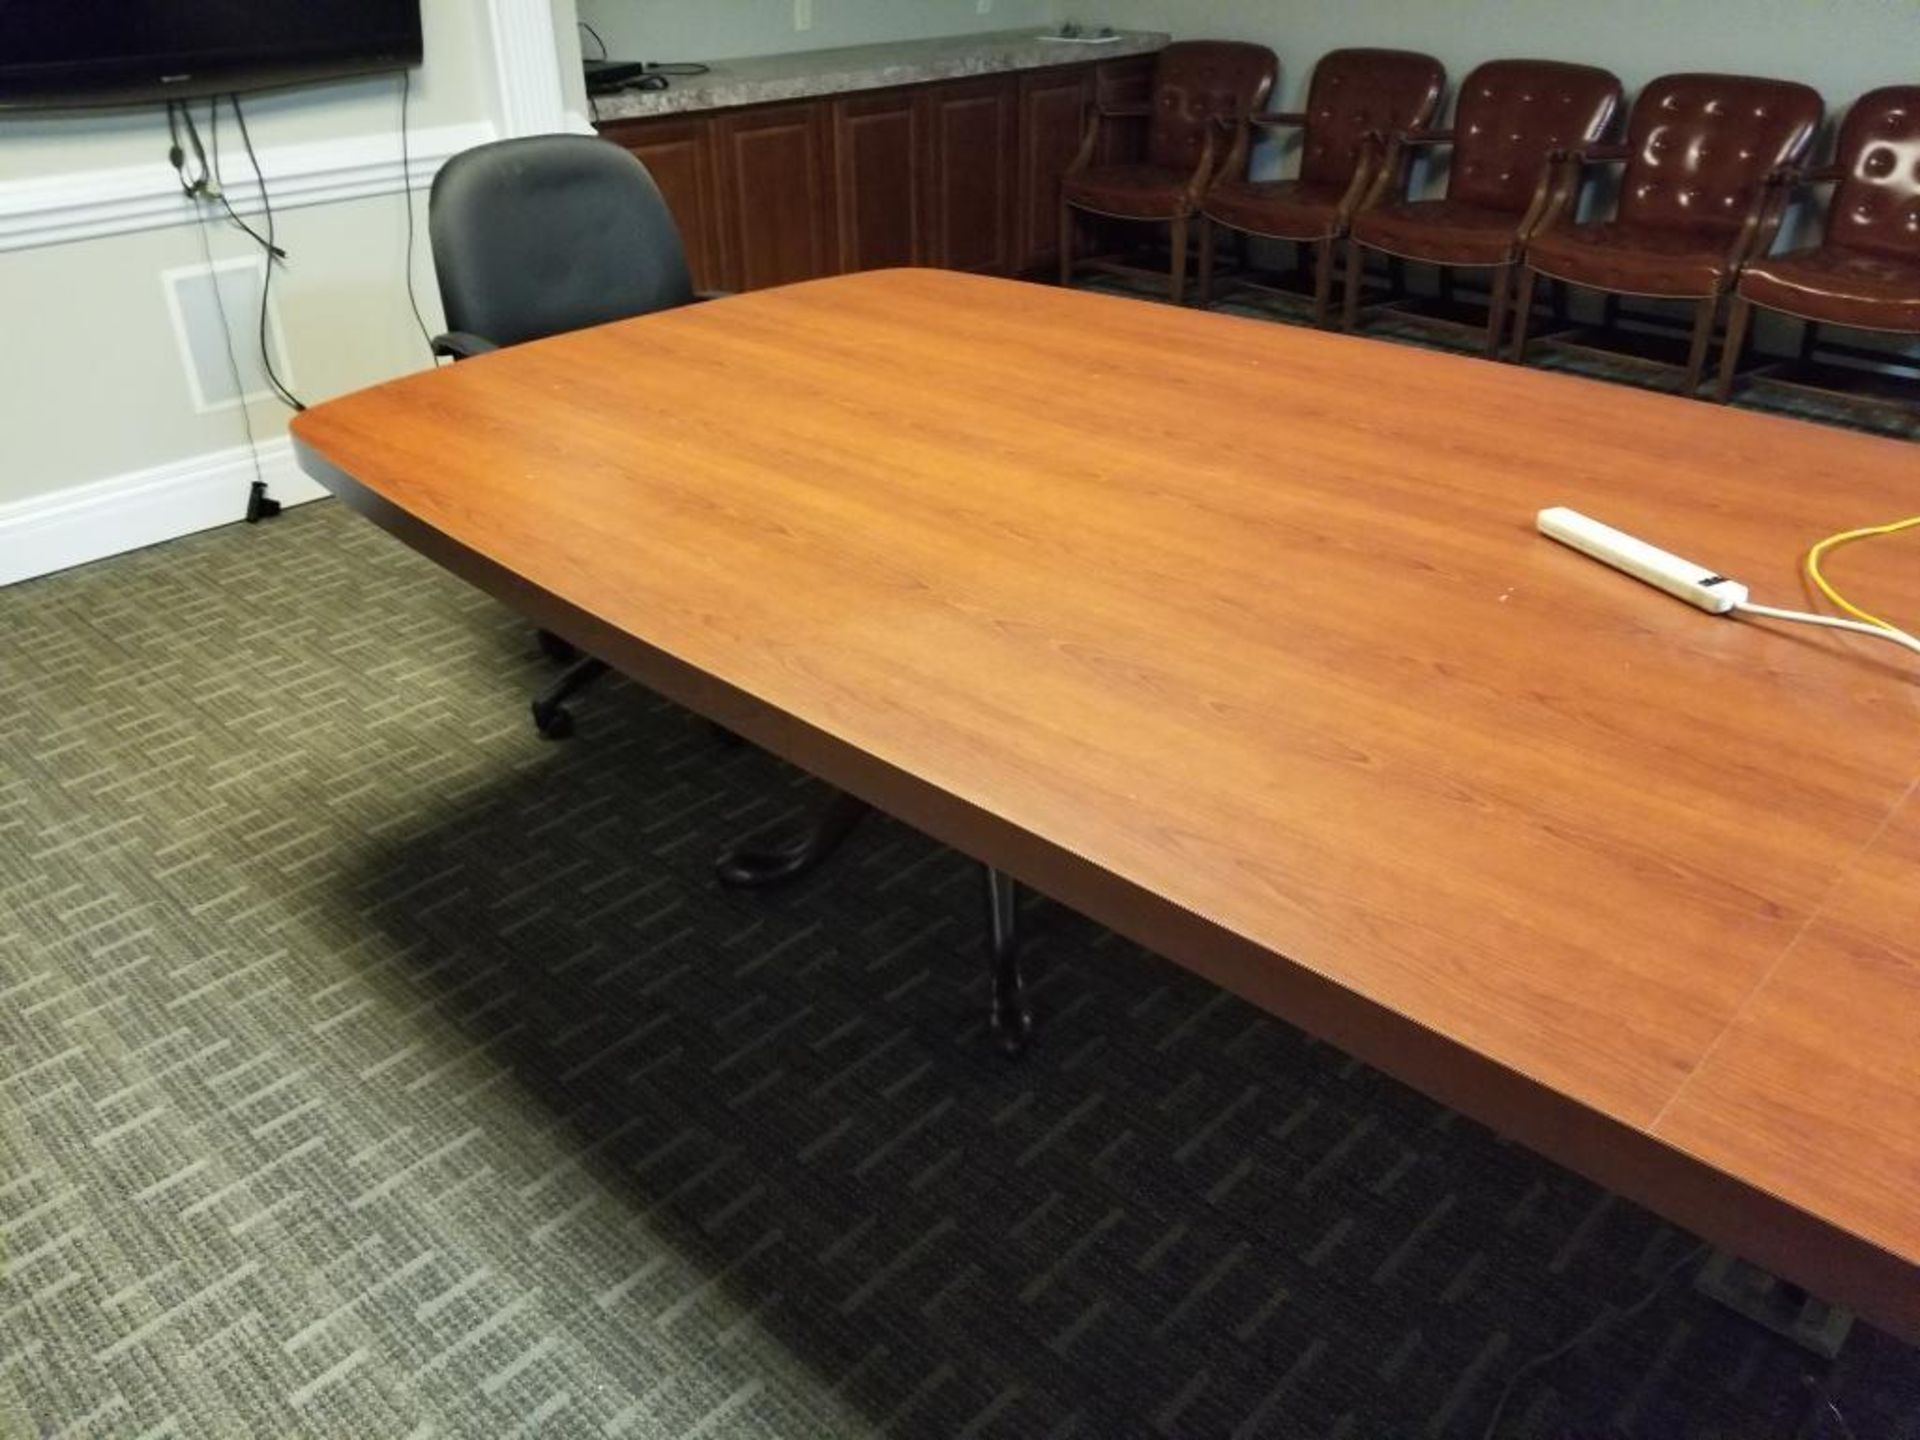 Office conference table 167x59x31 inches LxWxH. W/ two chairs. - Image 3 of 5